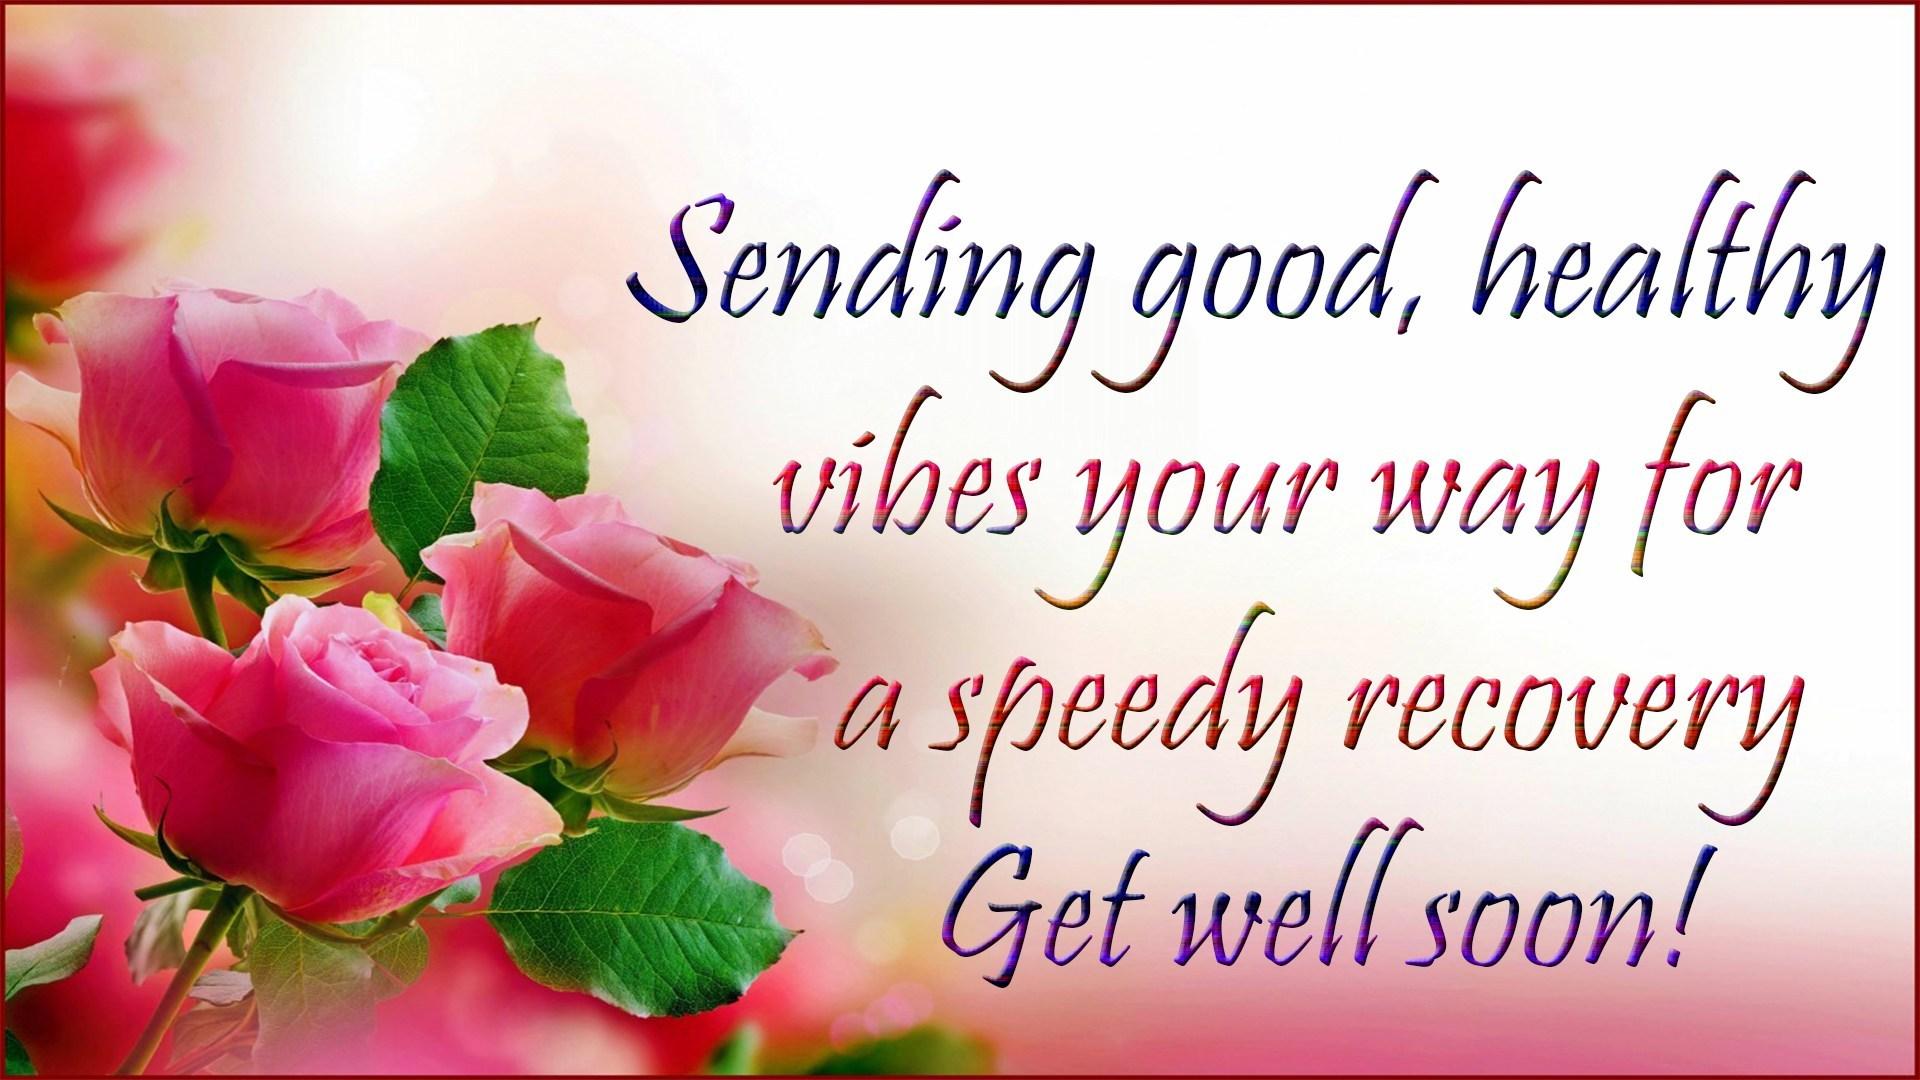 Get Well Soon Quotes Homecare24